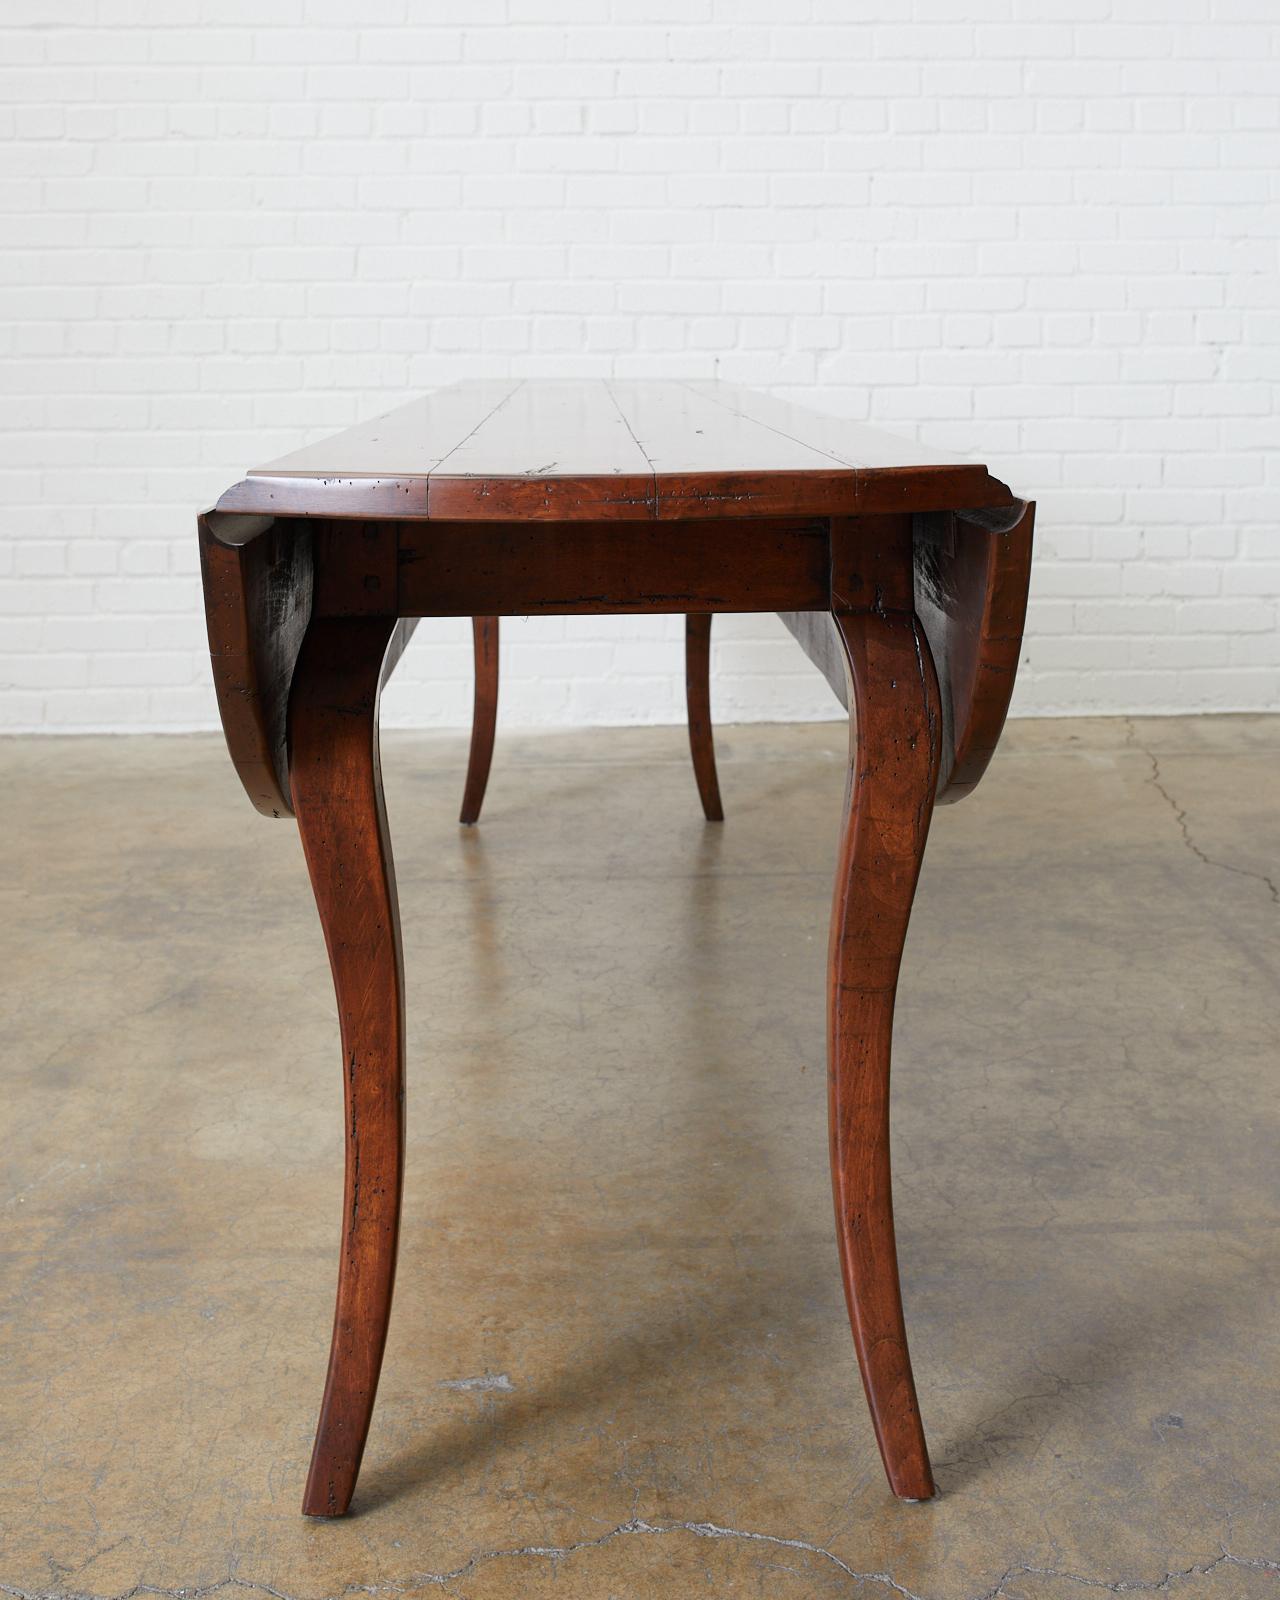 Hand-Crafted Mahogany Drop-Leaf Hunt Dining Table or Console